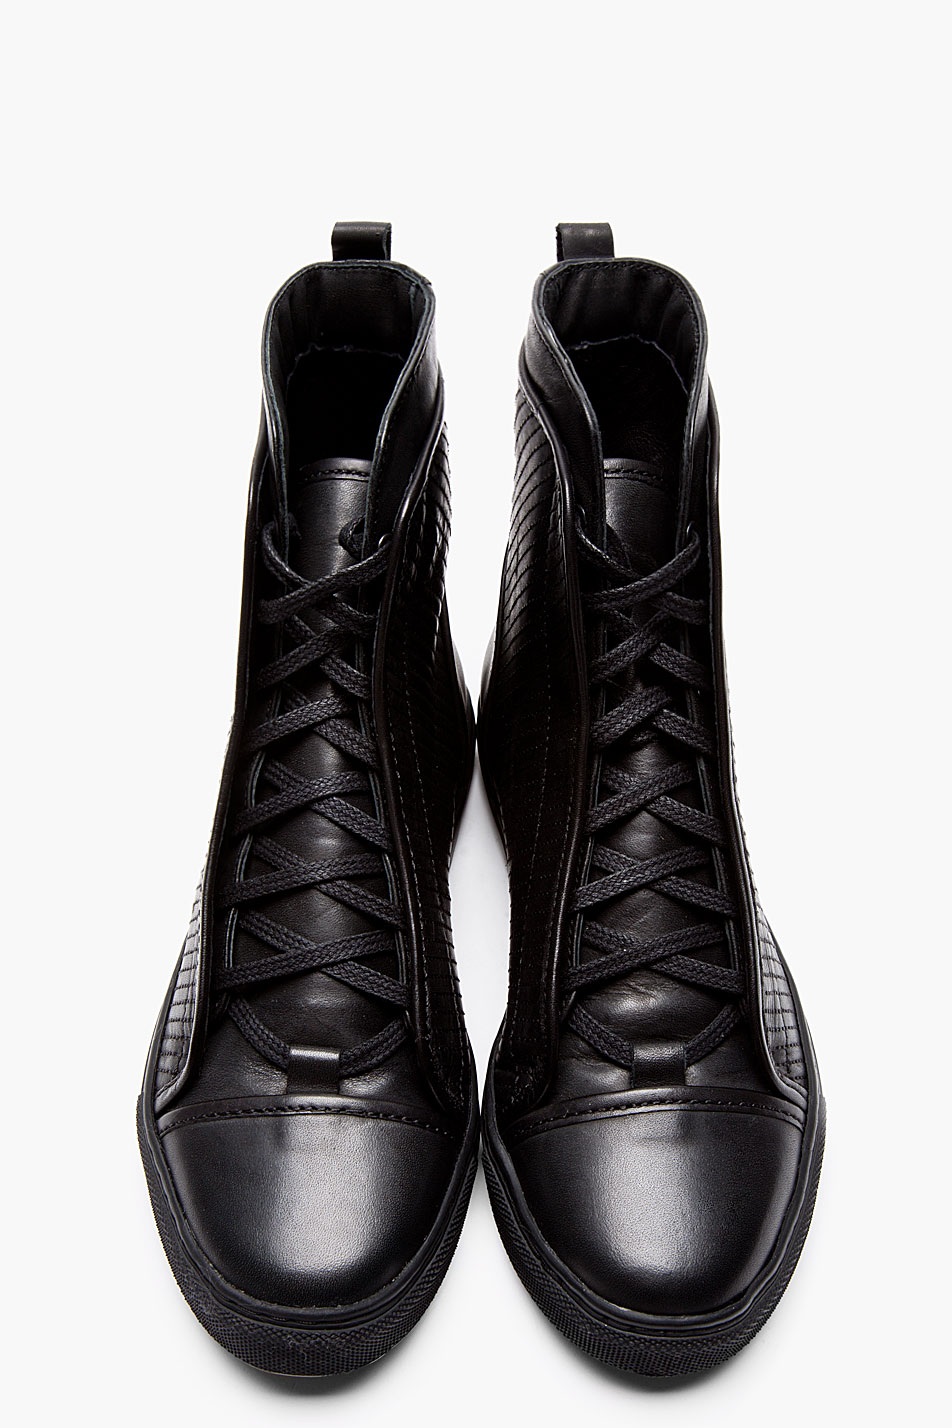 Silent - damir doma Black Stitched Leather Solta Sneakers in Black for ...